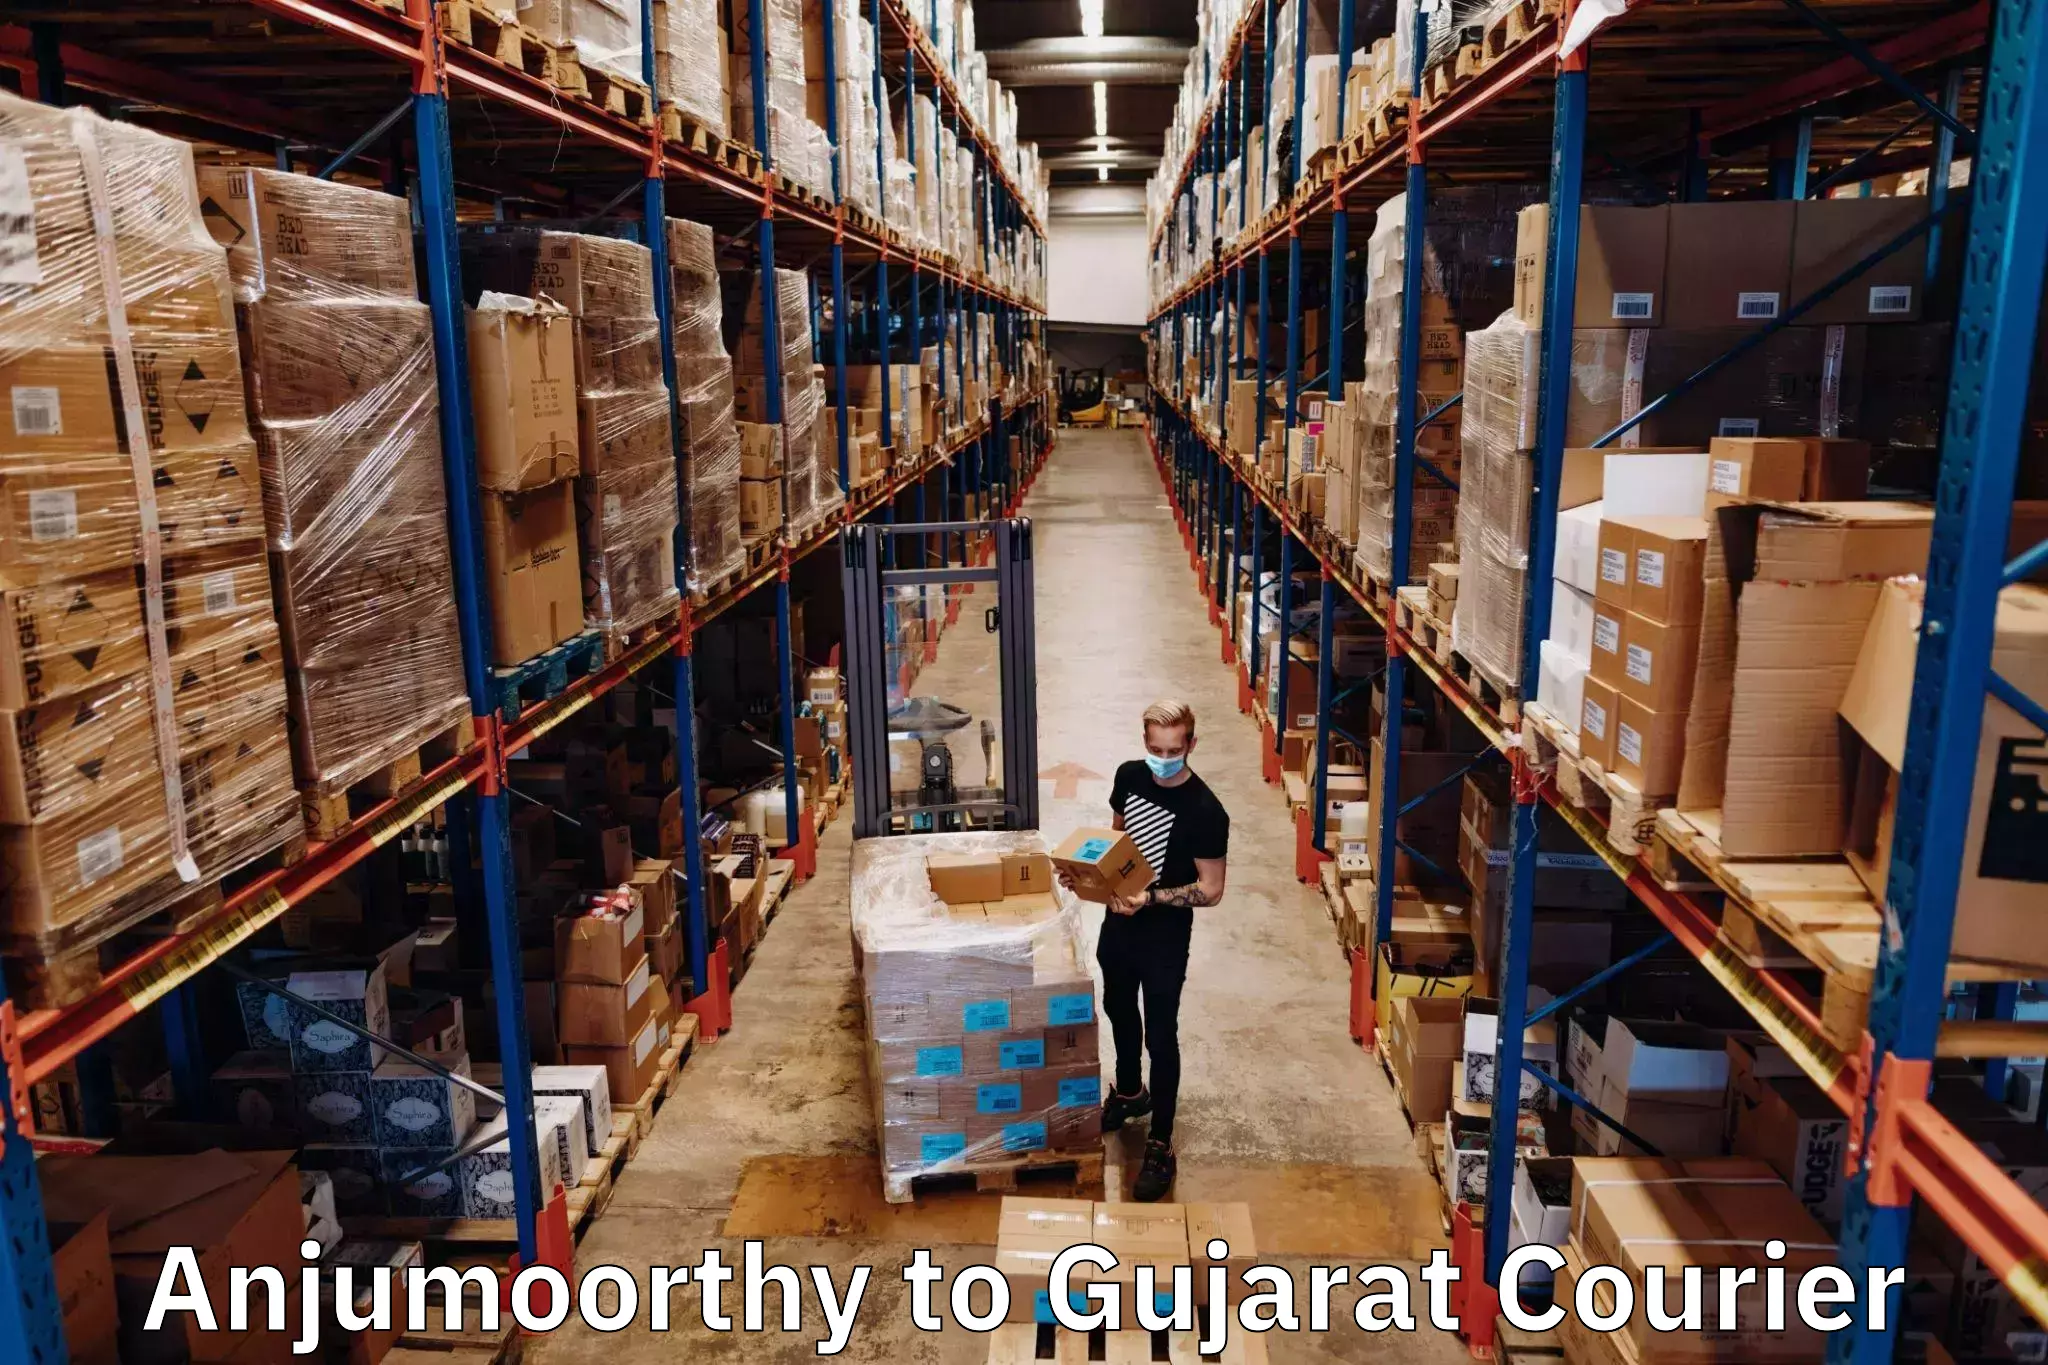 Reliable courier services Anjumoorthy to Kandla Port